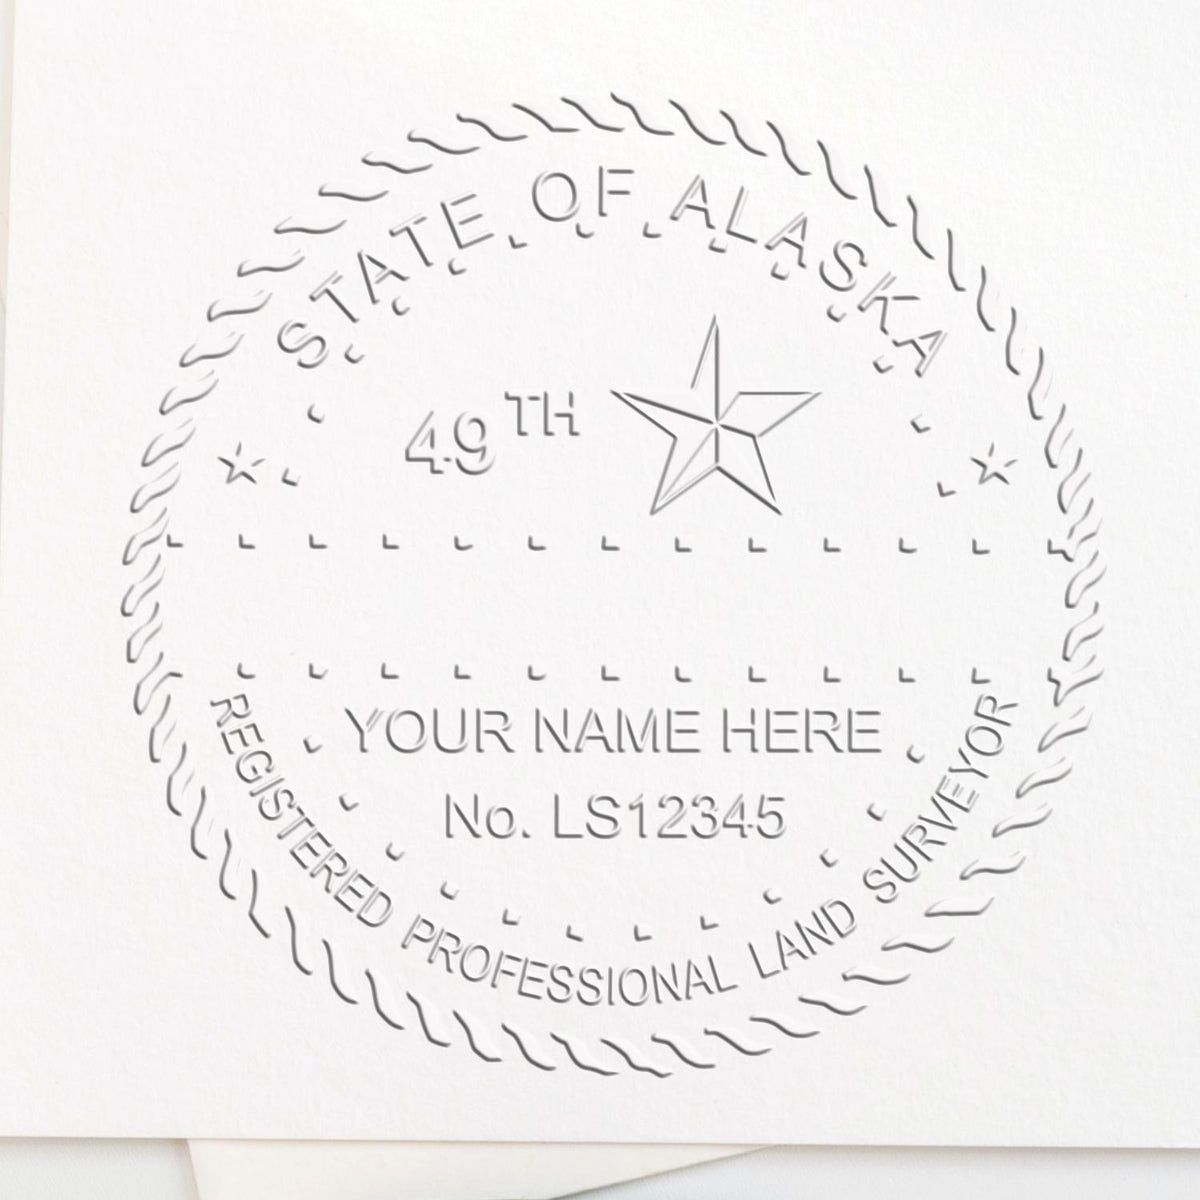 A stamped impression of the Long Reach Alaska Land Surveyor Seal in this stylish lifestyle photo, setting the tone for a unique and personalized product.